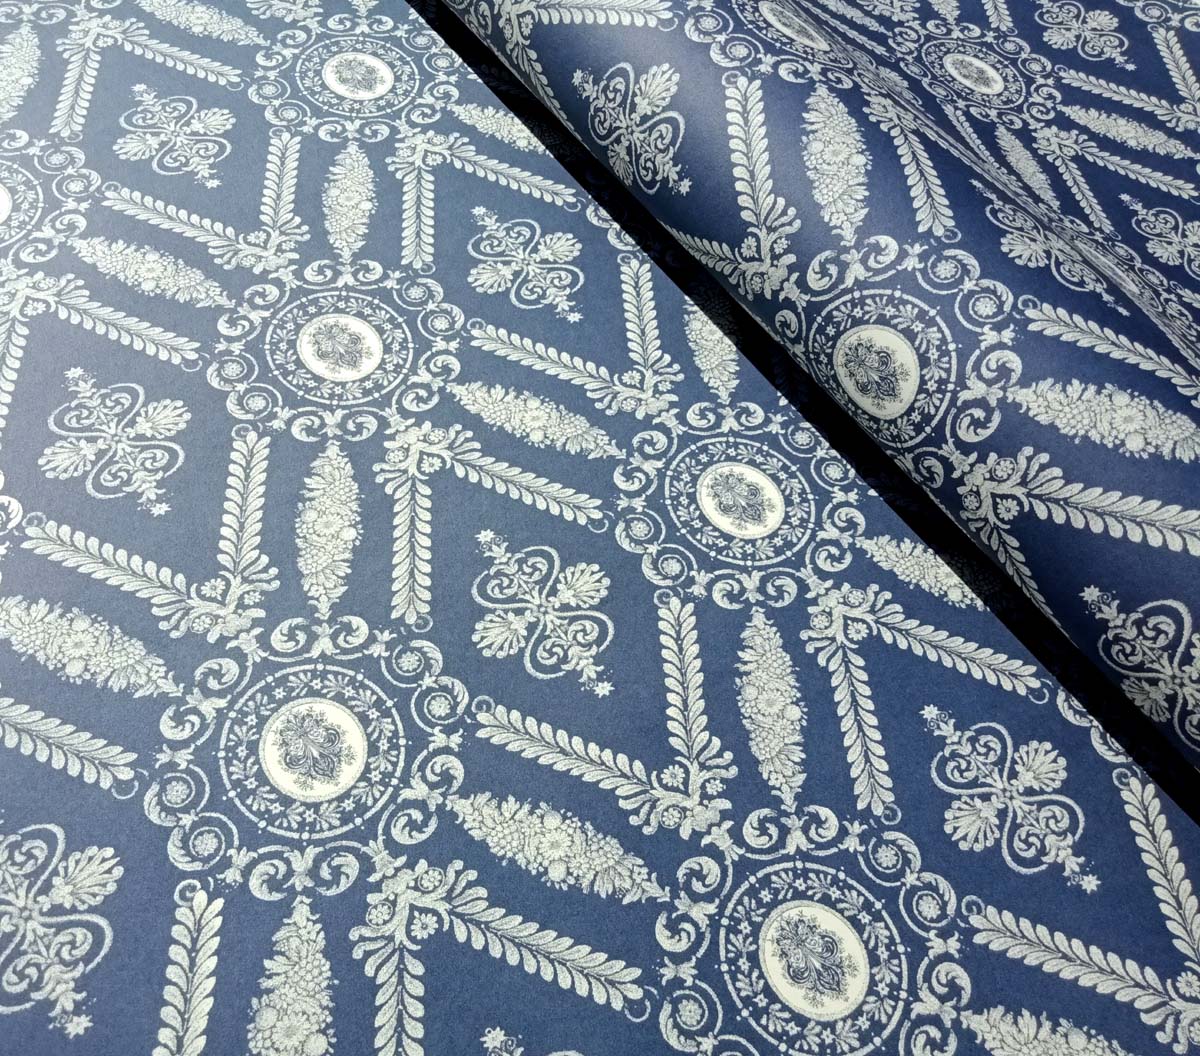 Navy blue- Italian Decorative Paper- 100 GSM Thick paper for bookbinding- Suitable for book covers and end sheets- TBBID26